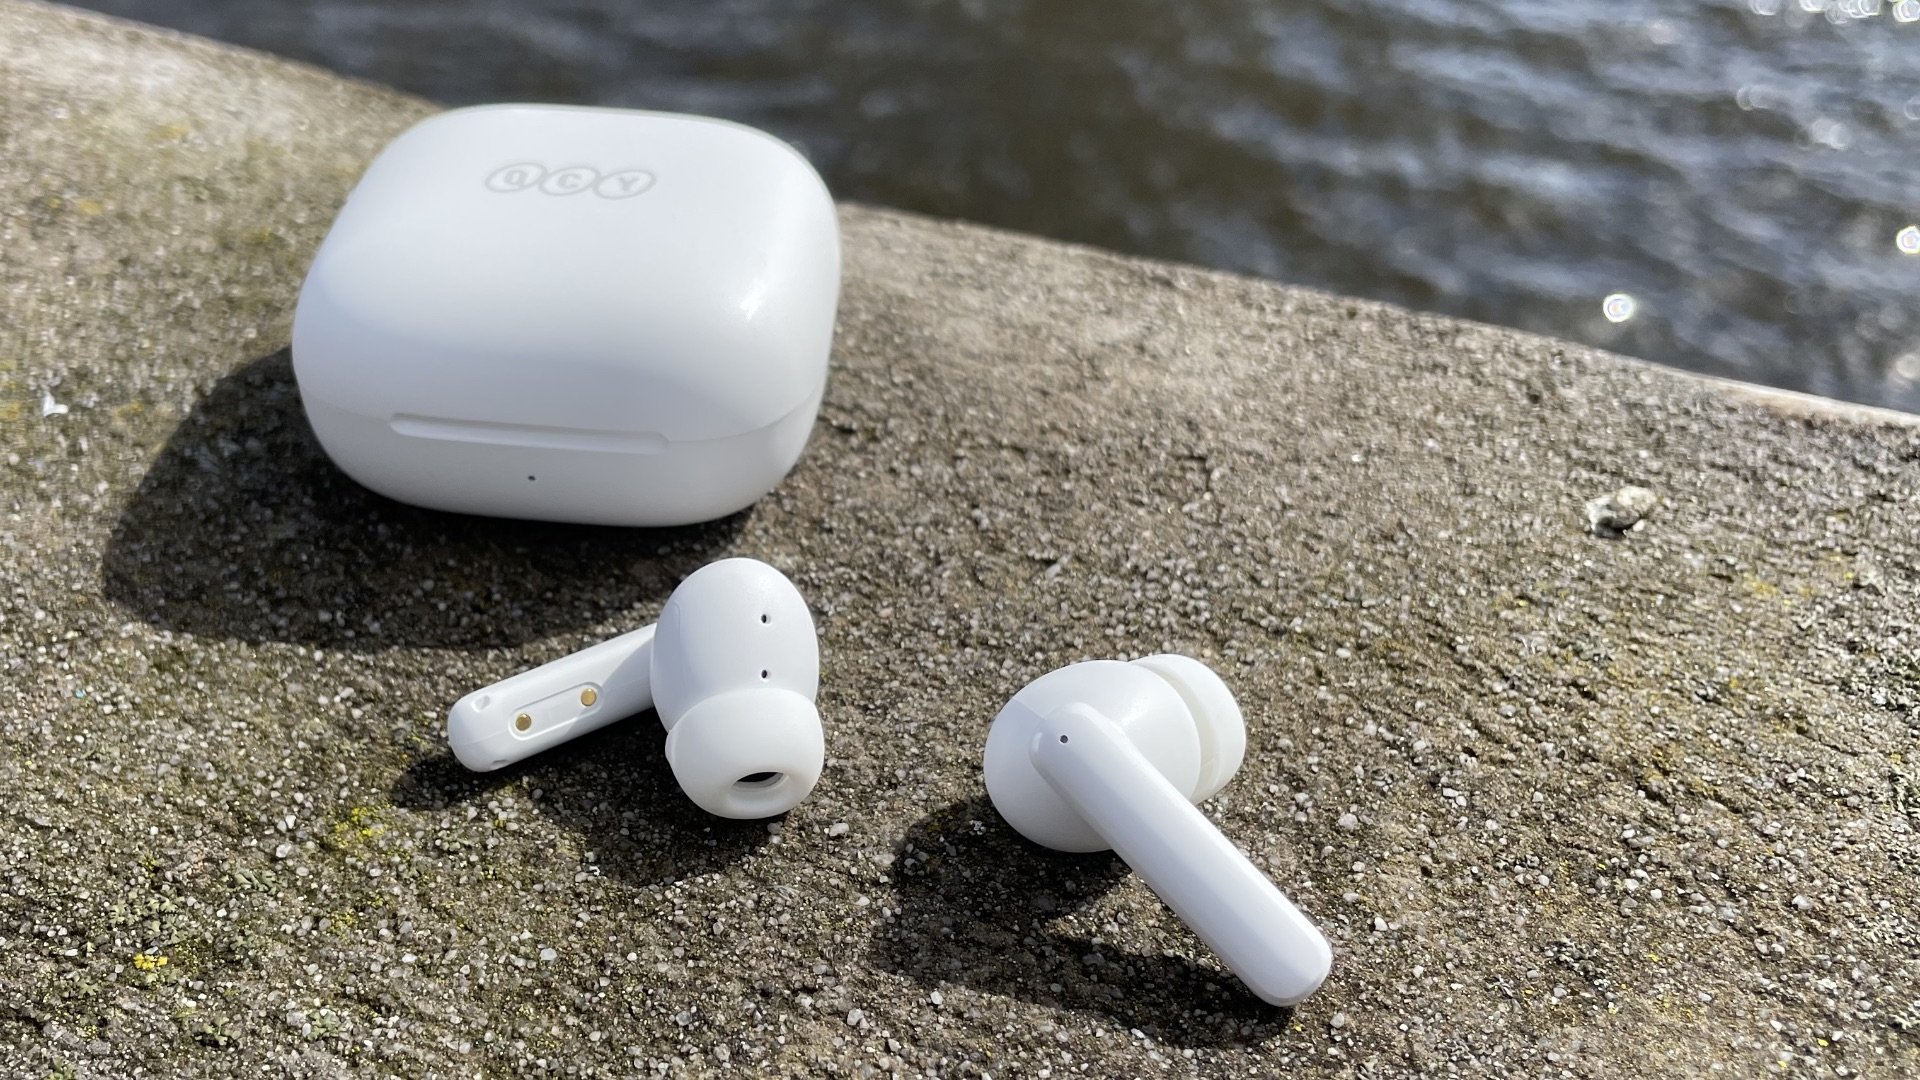 QCY T13 ANC Earbuds - Reviewed 